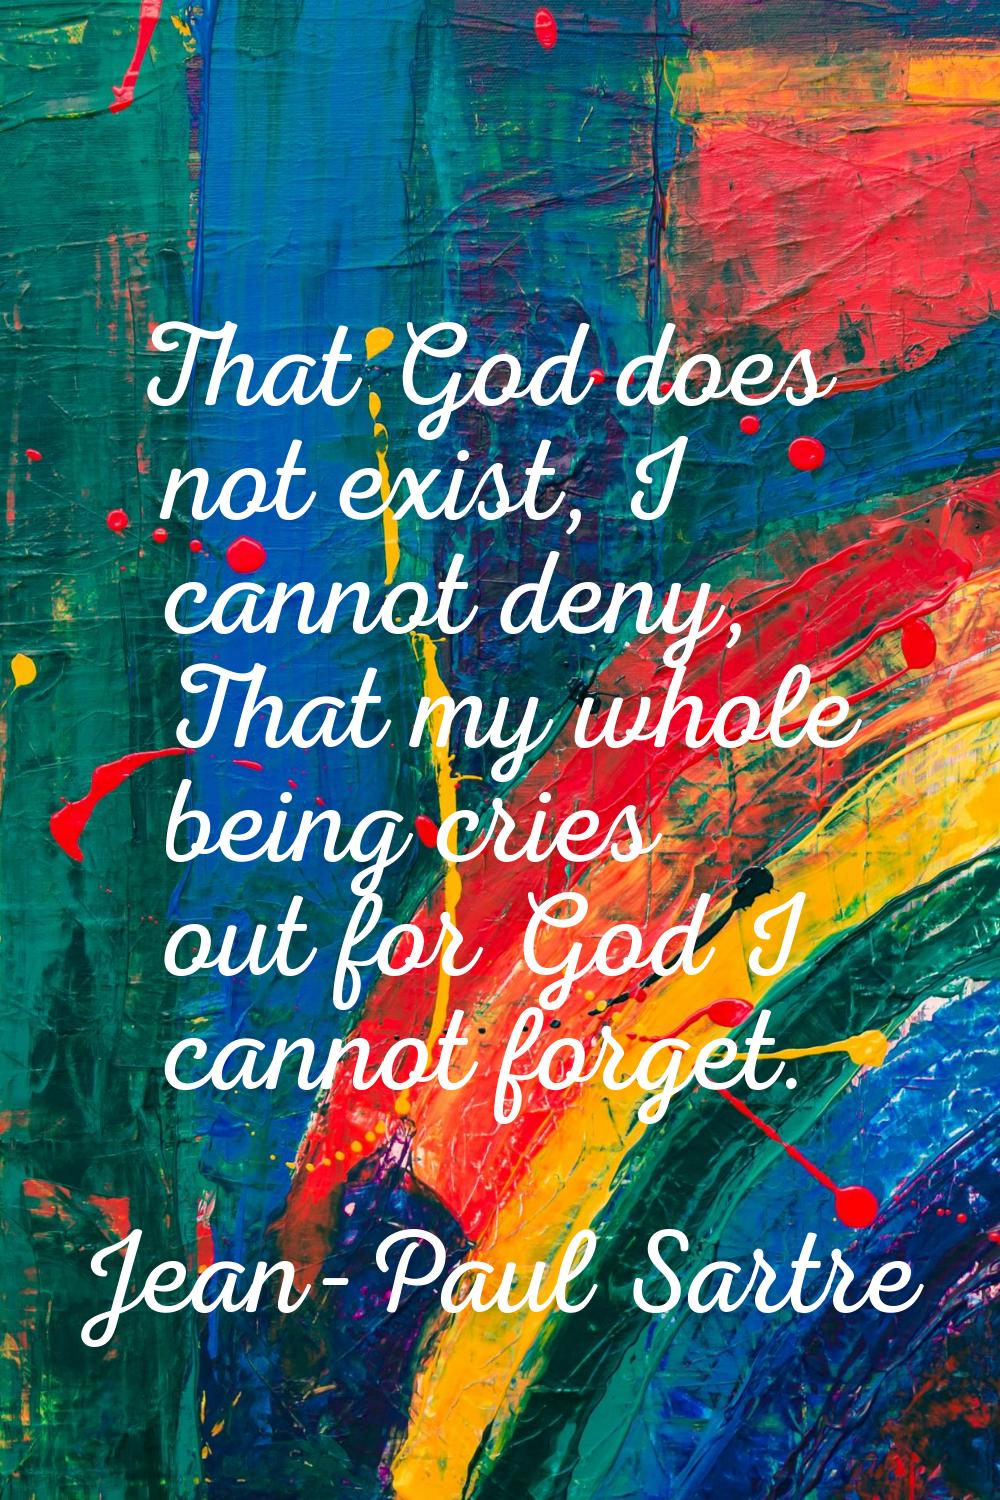 That God does not exist, I cannot deny, That my whole being cries out for God I cannot forget.